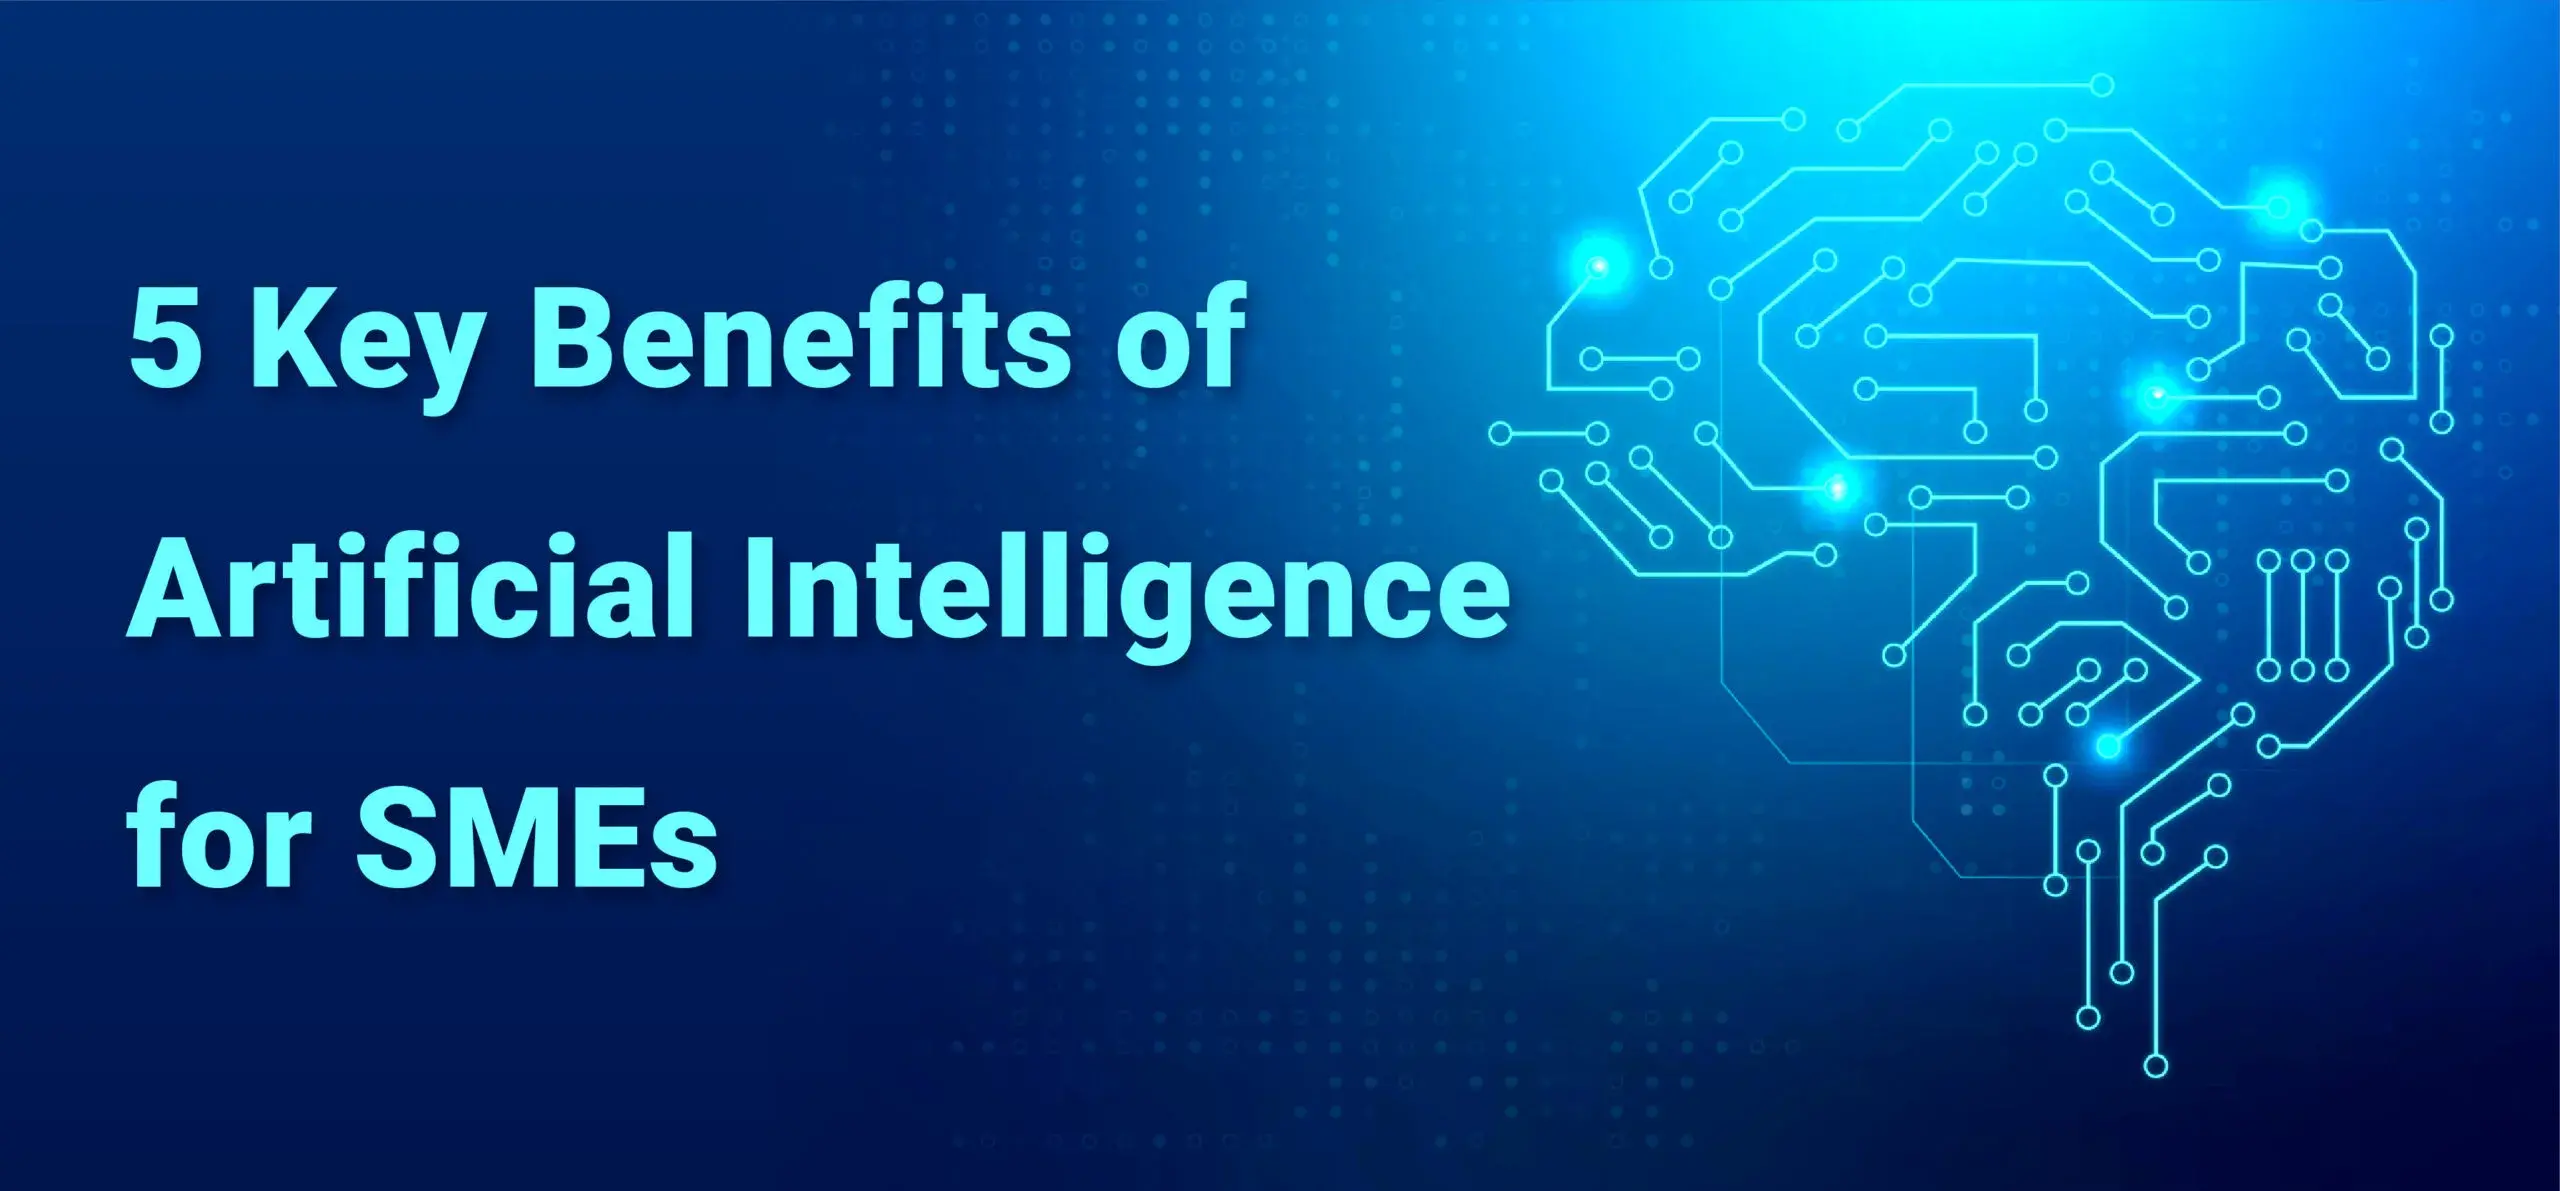 5 Key Benefits of Artificial Intelligence for SMEs.